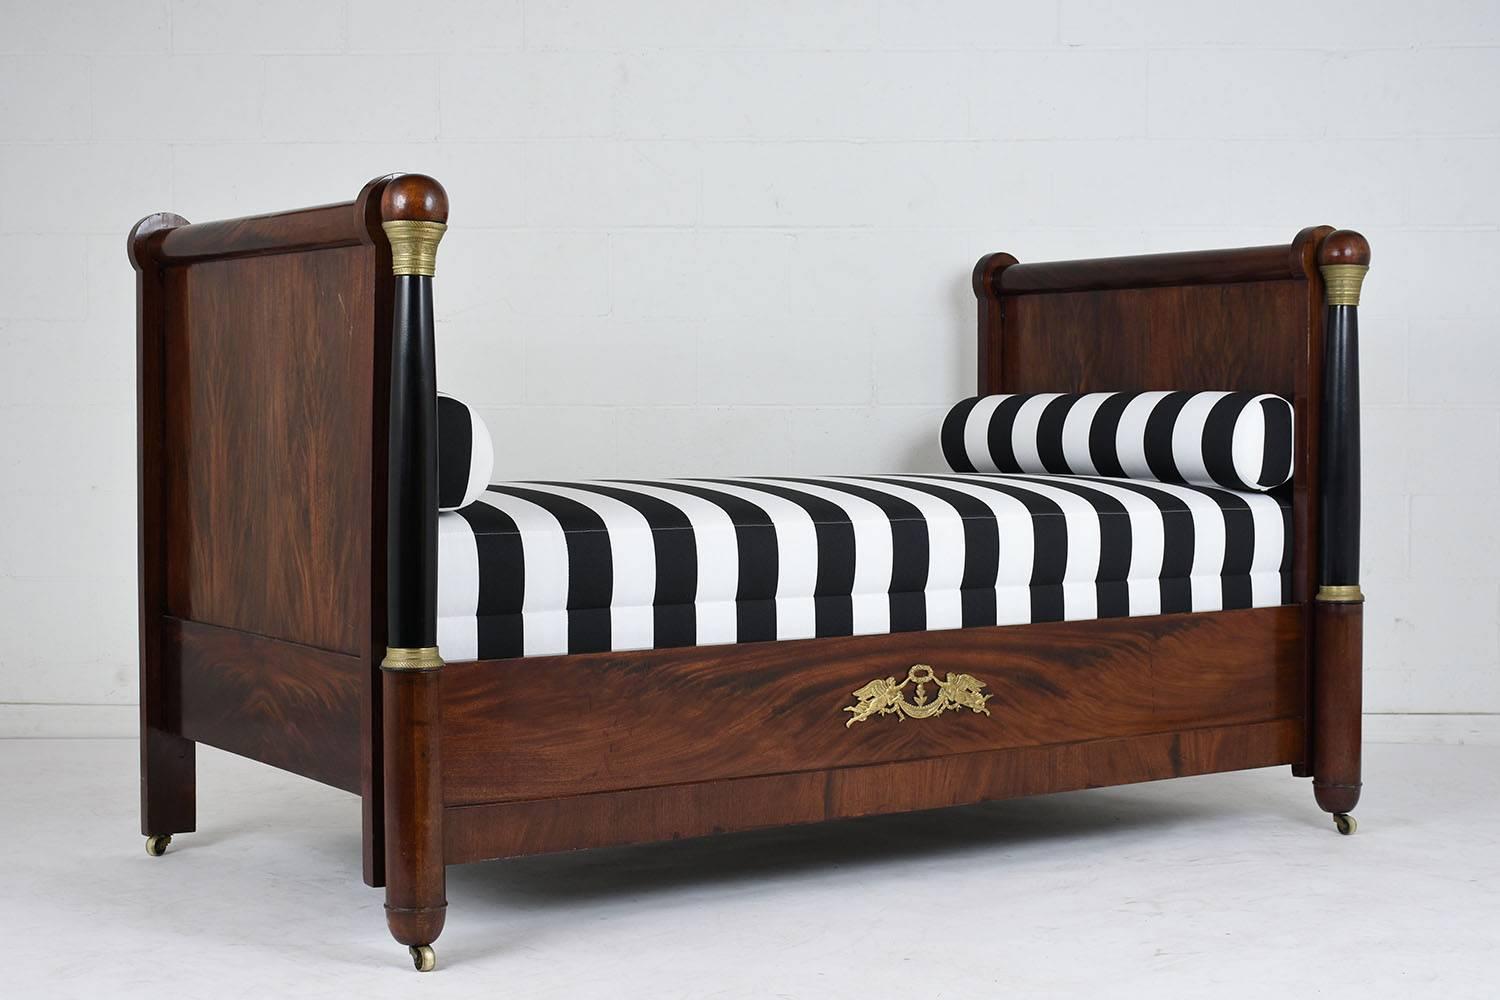 This Stunning 1840's French Empire-style Daybed has been completely restored, the frame is made out of mahogany wood and is stained a rich mahogany color with black column accents and bronze decor. The daybed features a new comfortable foam cushion